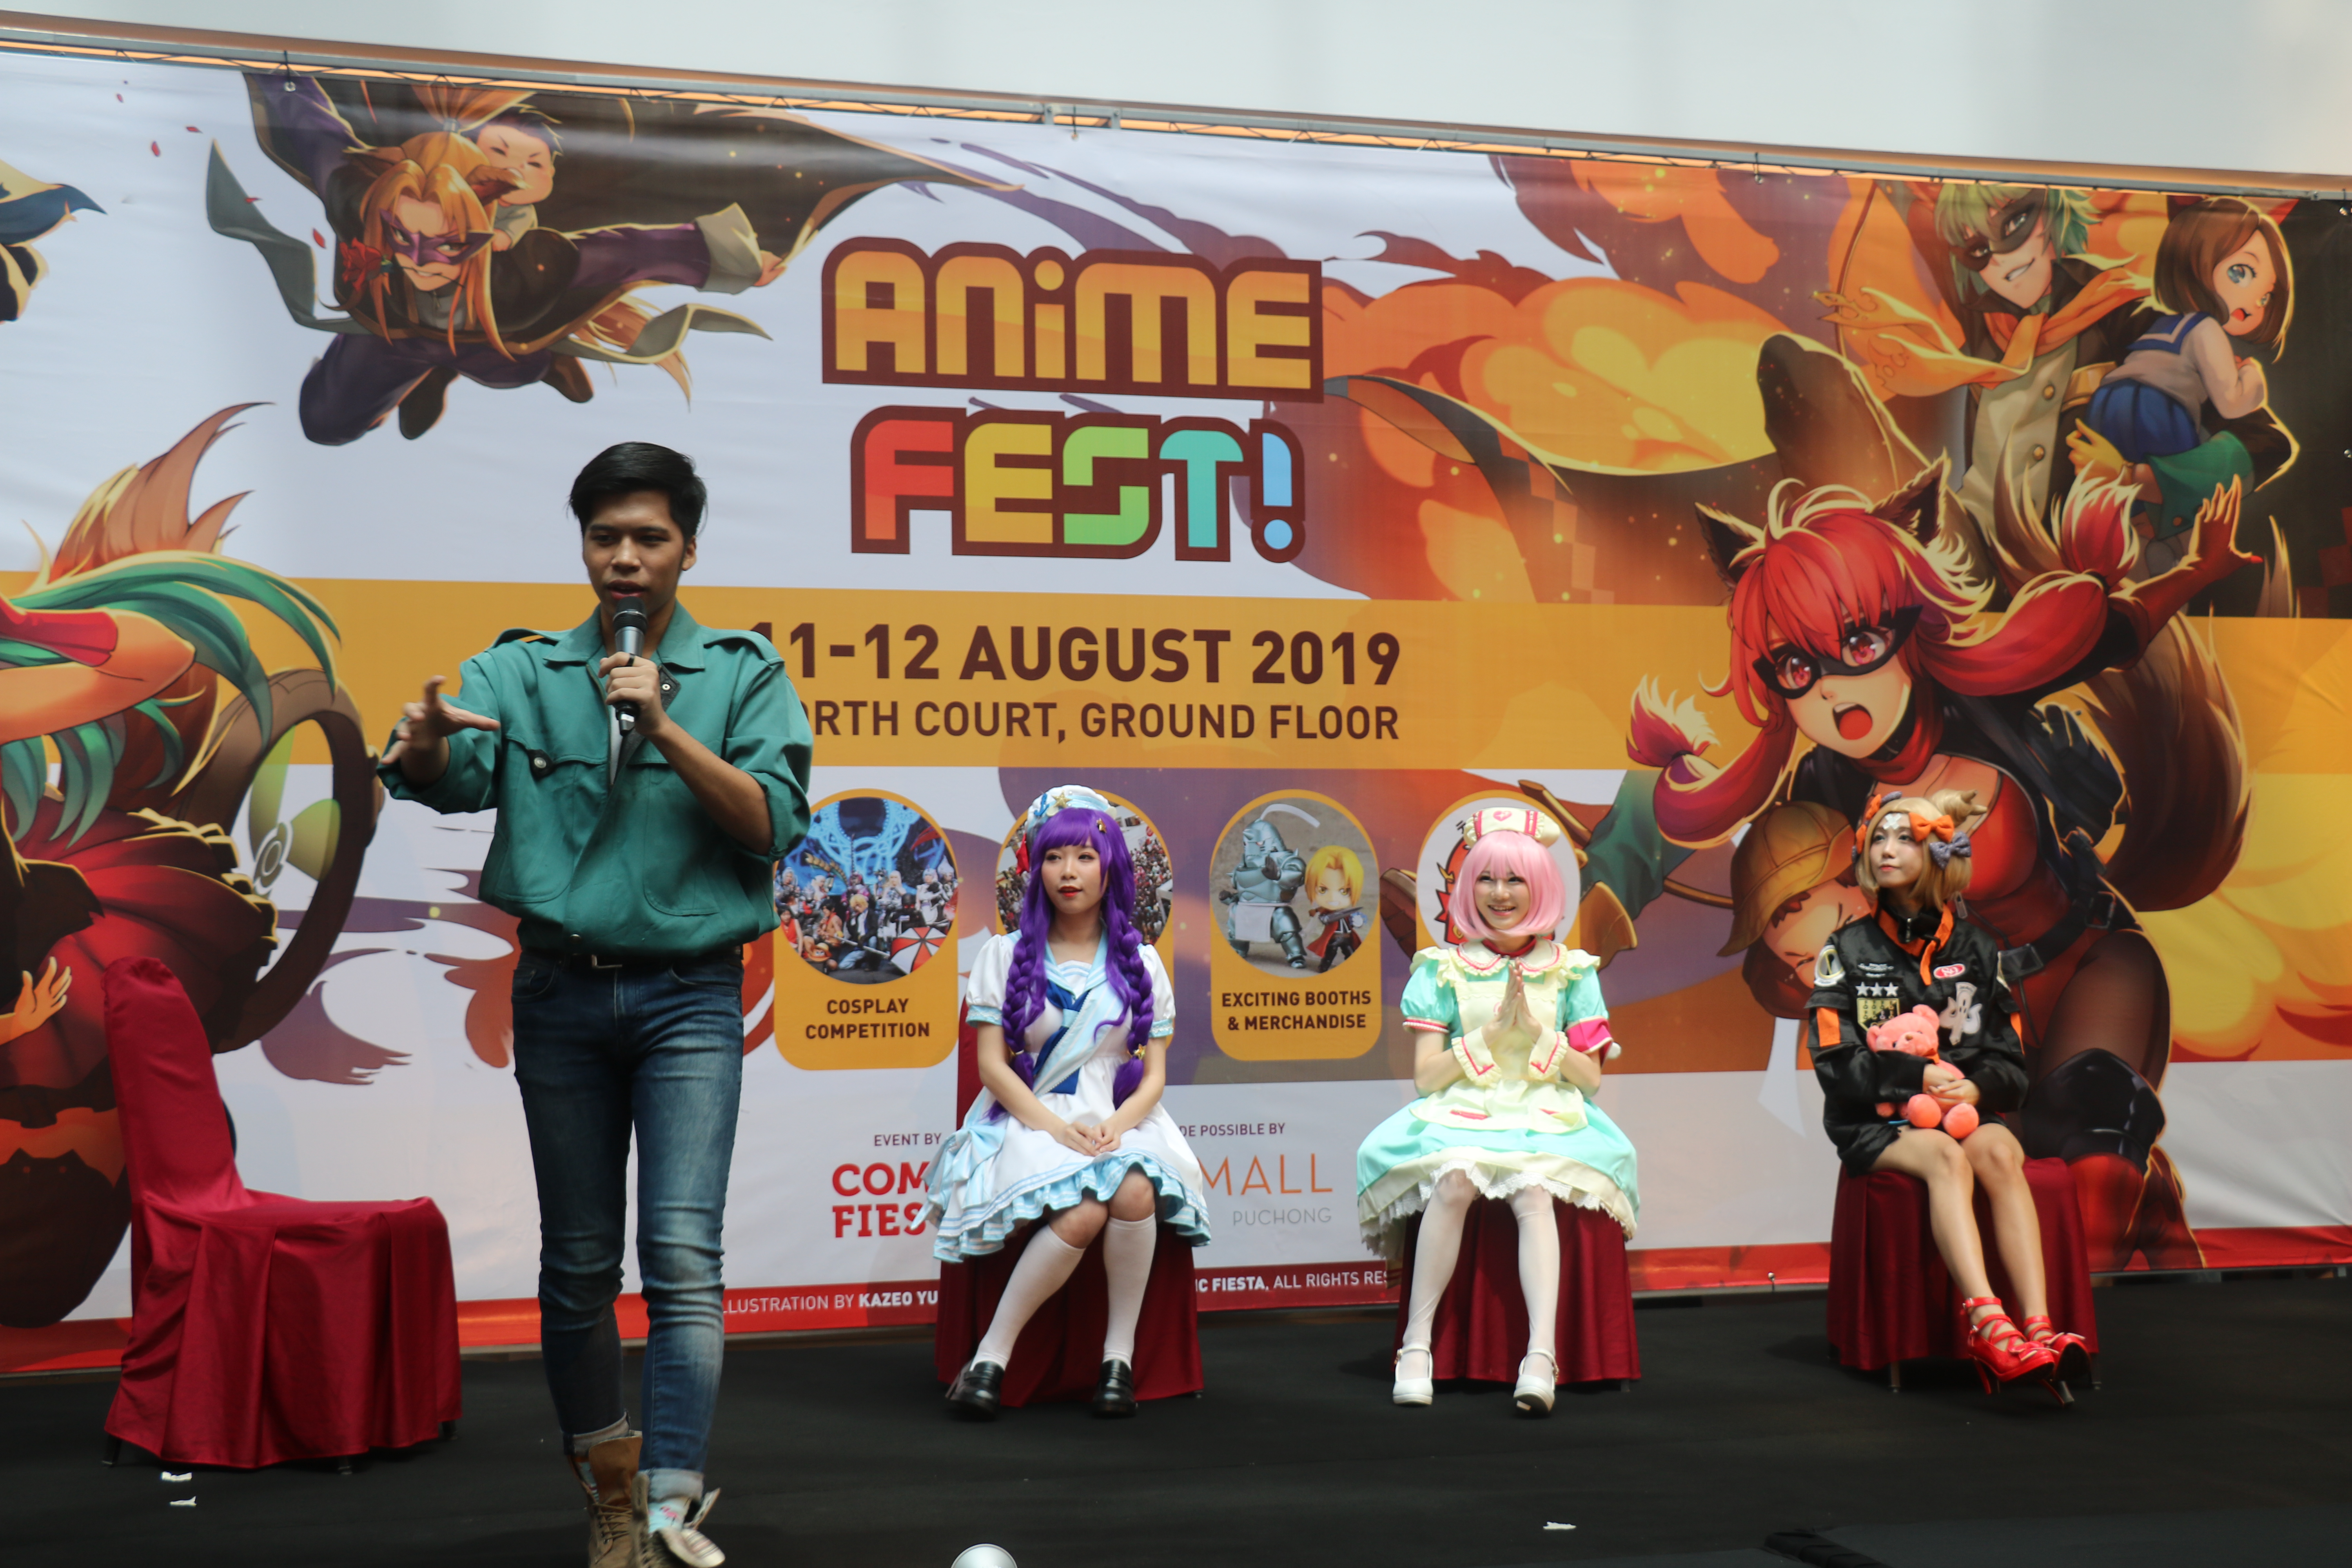 Can't wait to meet you guys on 24-25th June at Anime Fest IOI City